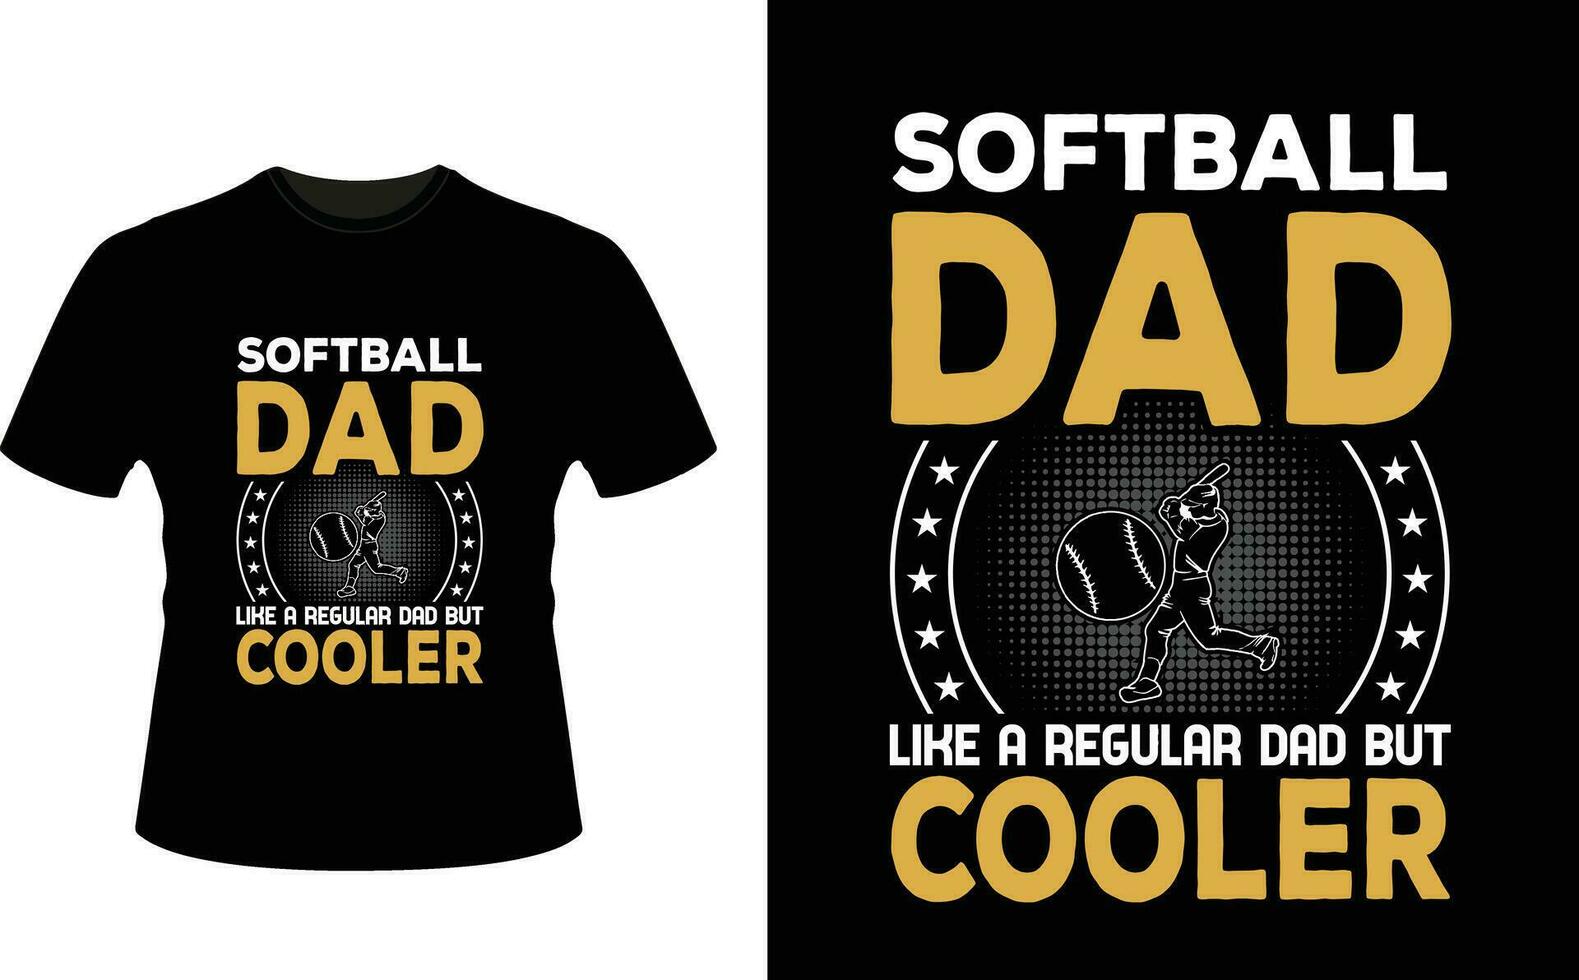 Softball Dad Like a Regular Dad But Cooler or dad papa tshirt design or Father day t shirt Design vector